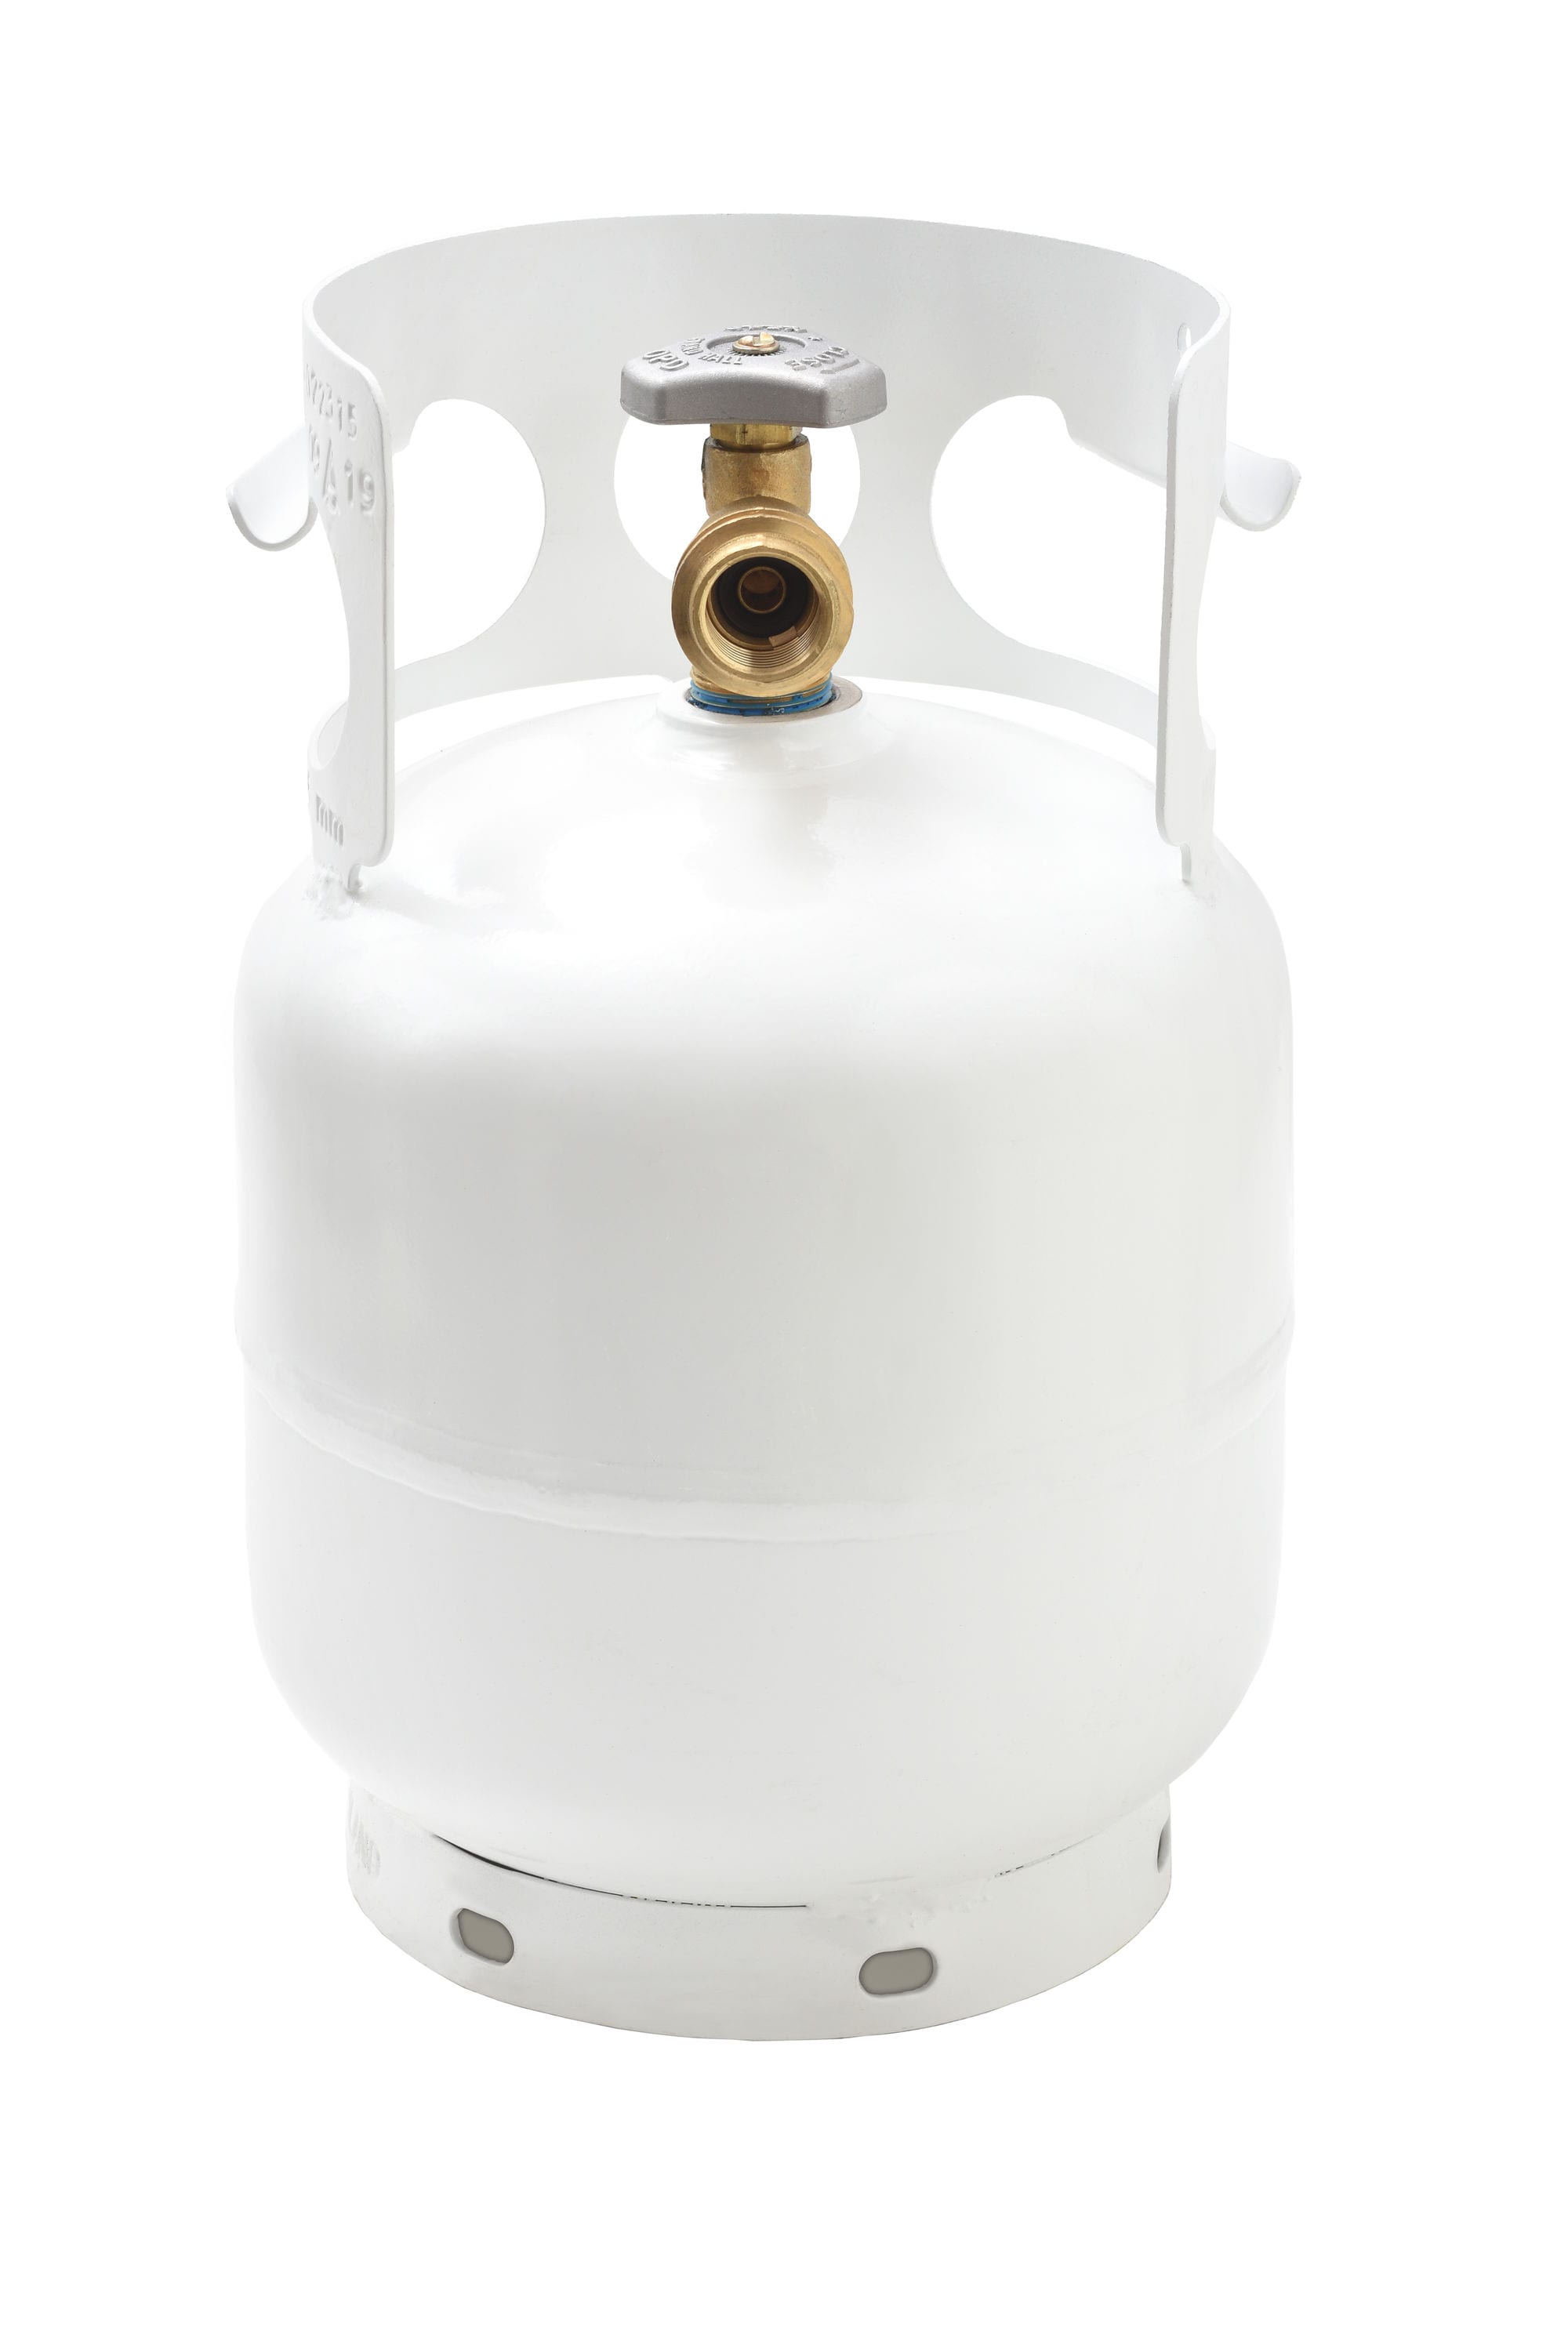 Bernzomatic 1 lb. All-Purpose Propane Gas Cylinder (2-Pack) 332773